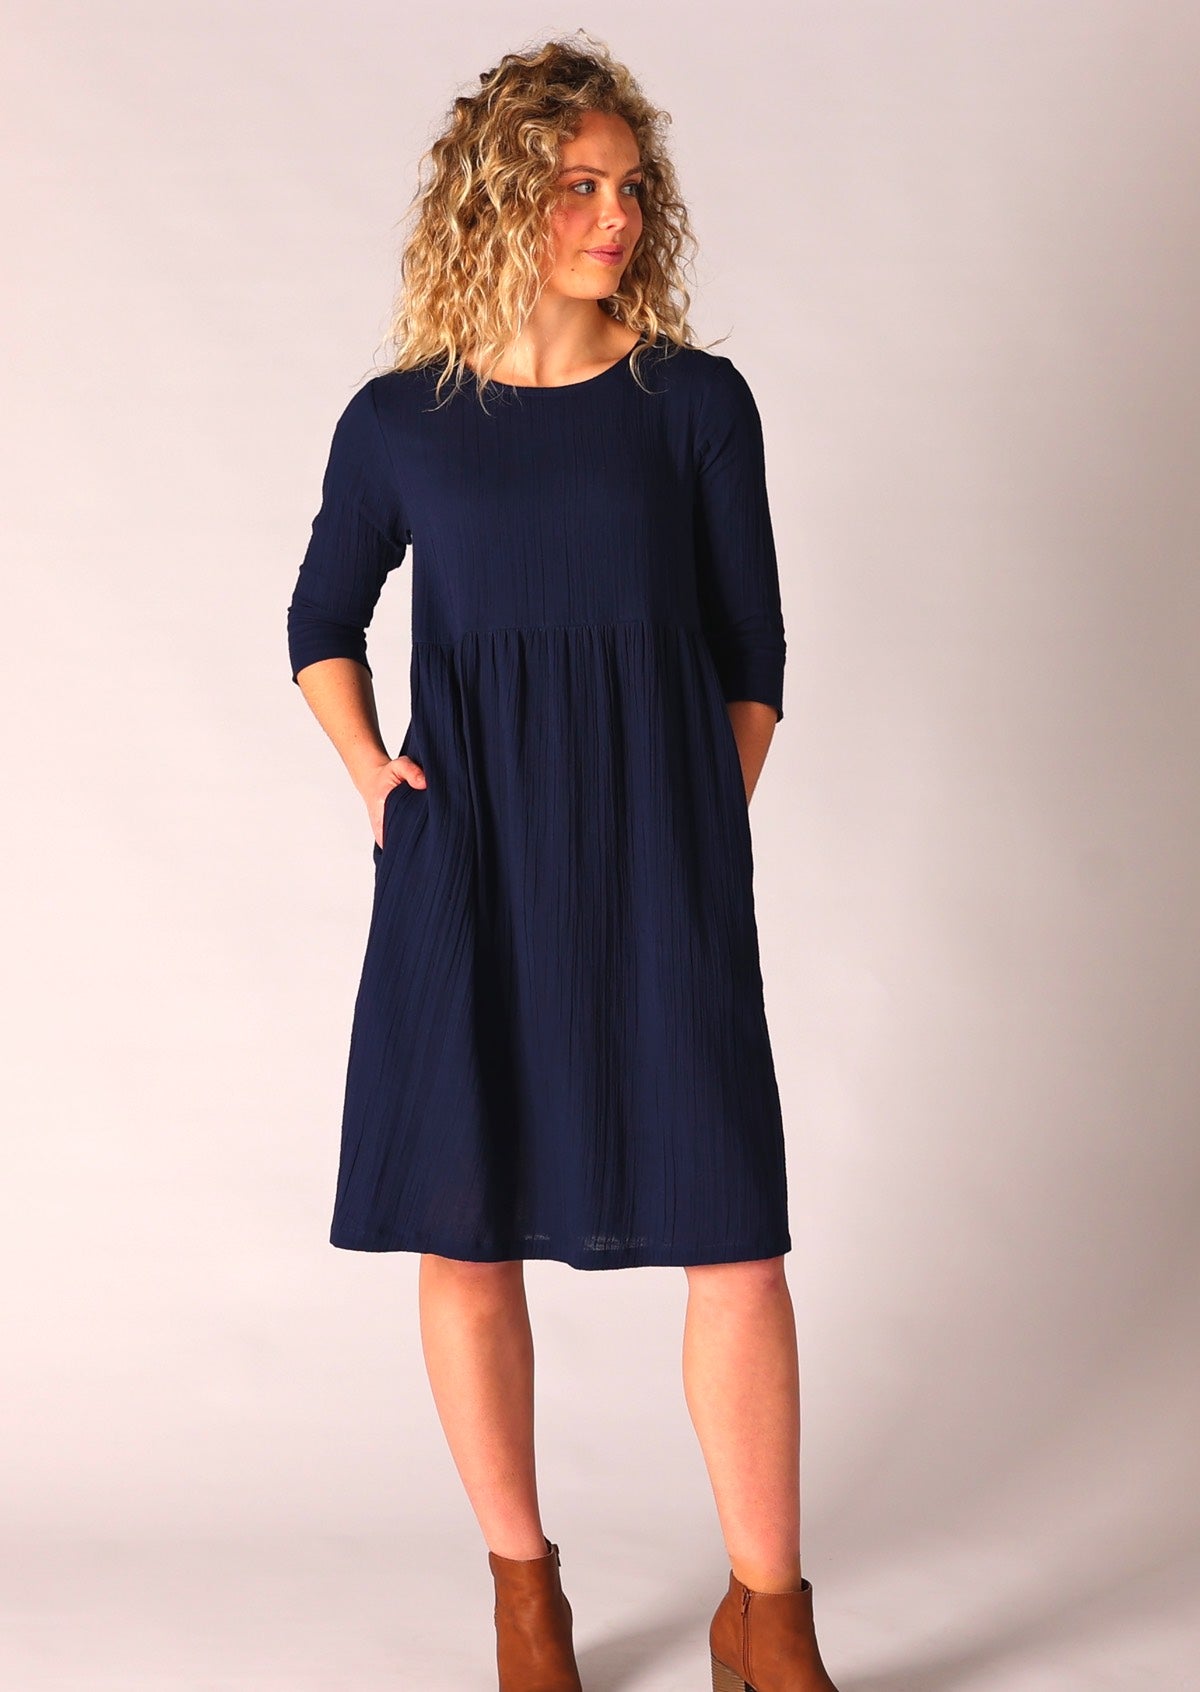 Dark blue 100% cotton dress made from two layers of lightweight gauze